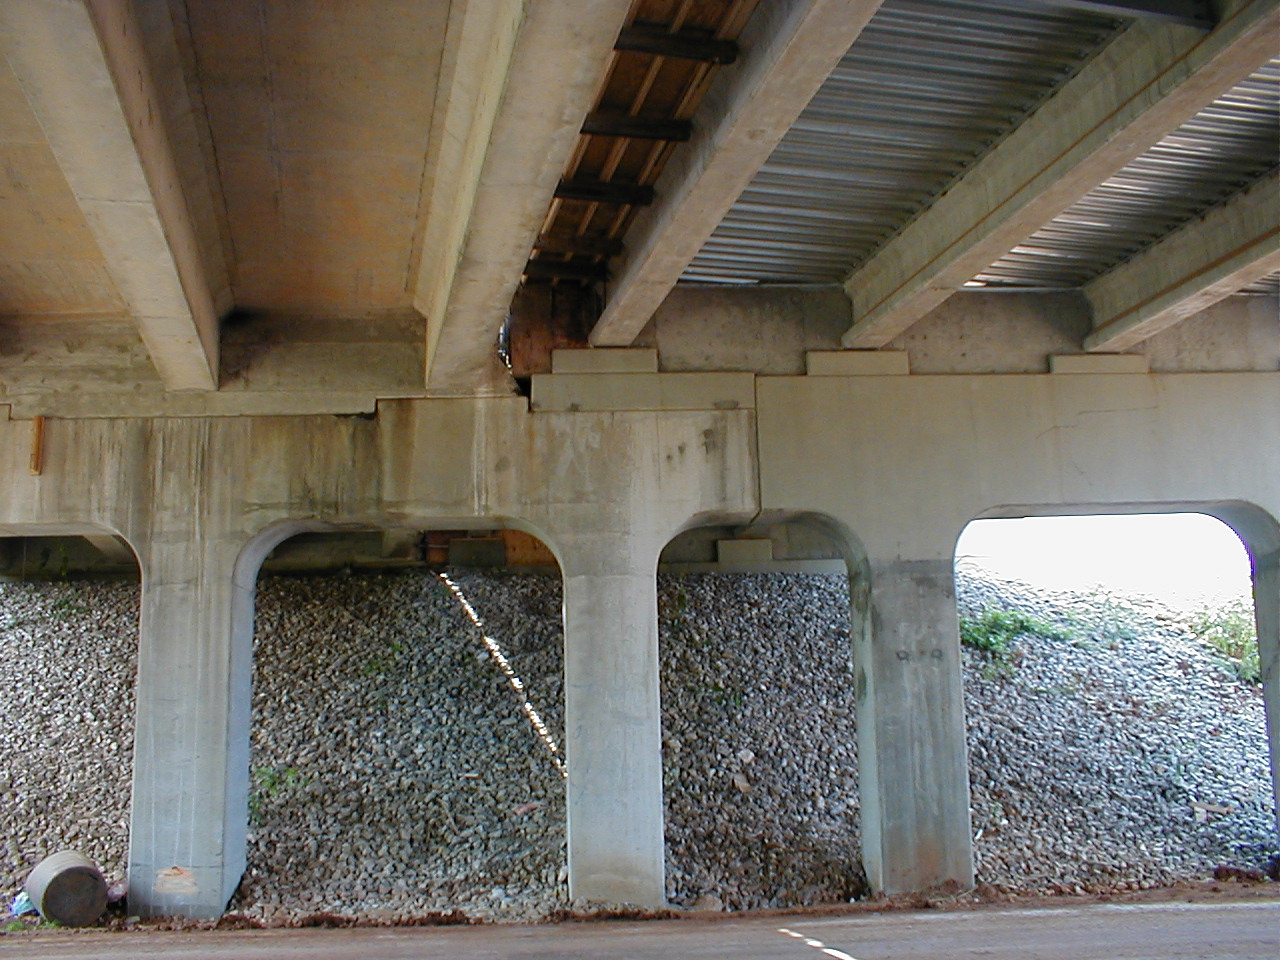 Shows the separation between the new road bed and the old road bed of north bound bridge. The new is on the right and the old is on the left.